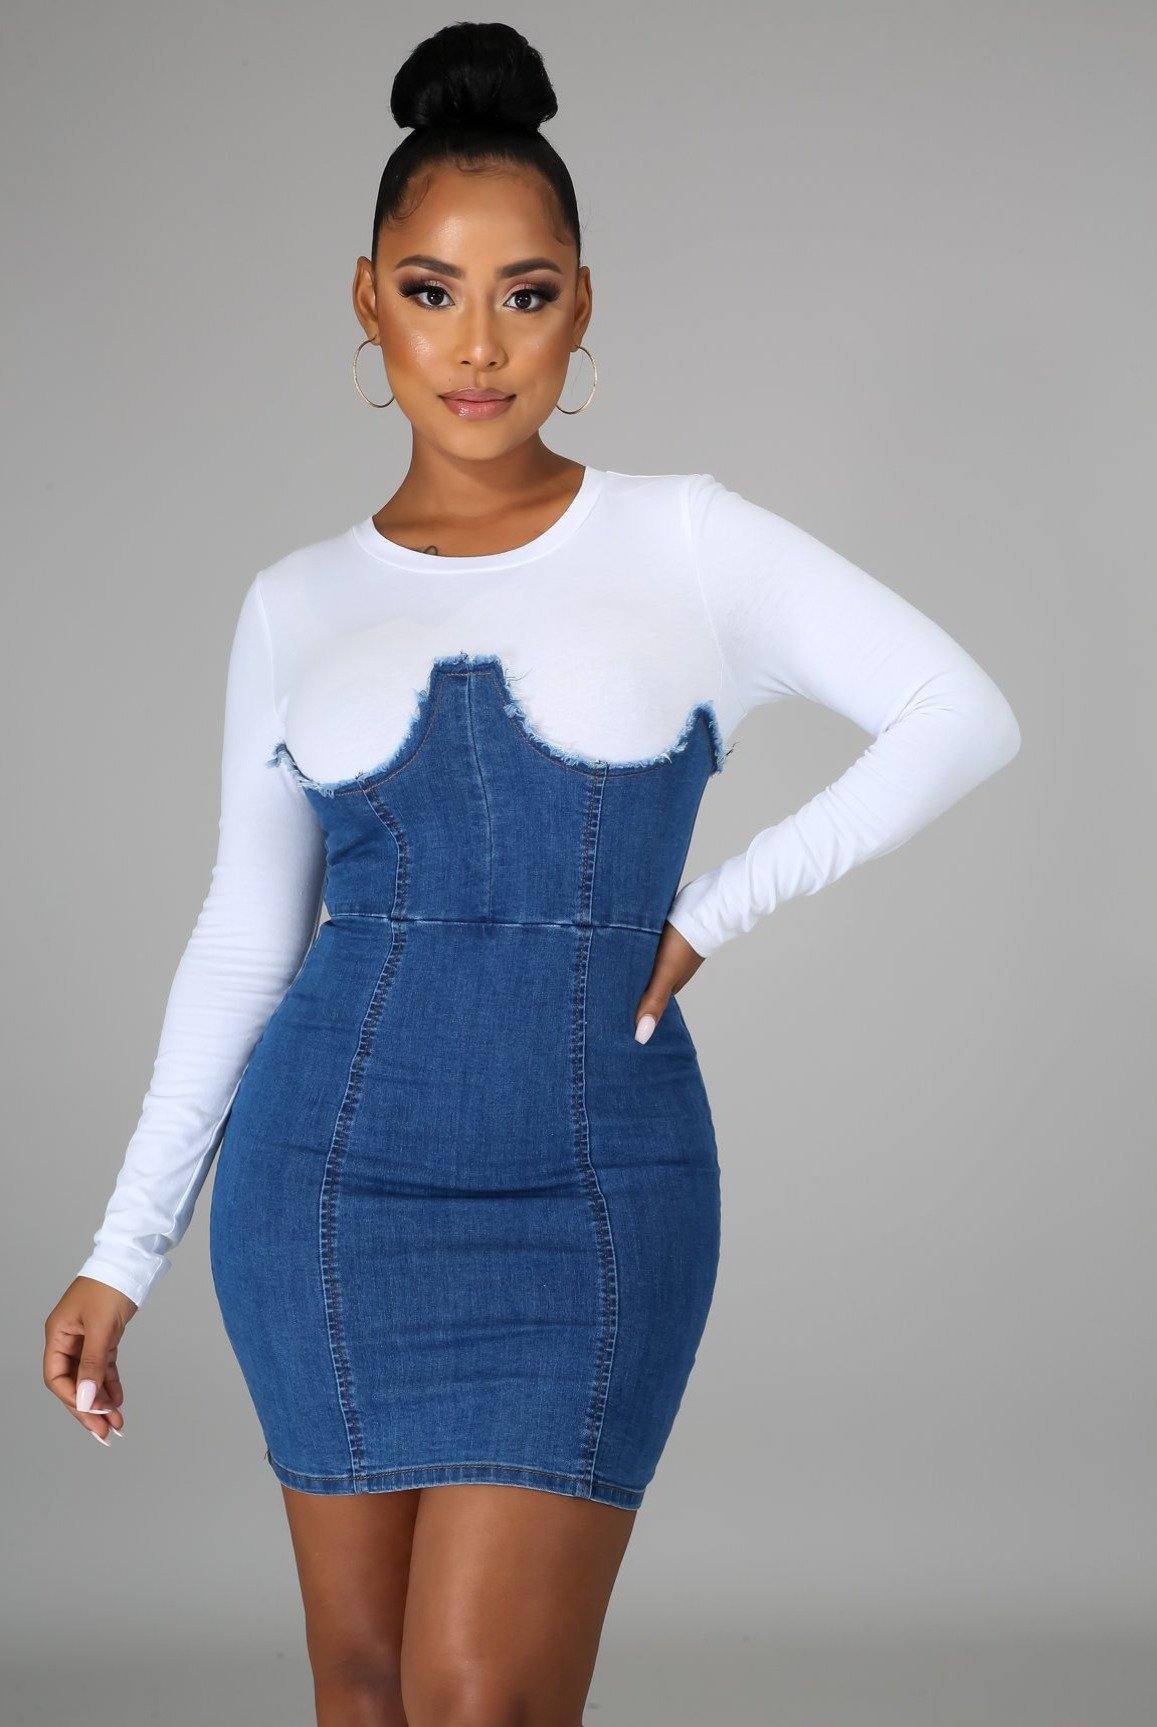 In The Mean Time....Two Tone Denim Tee Dress | Swagg Boutique LLC.